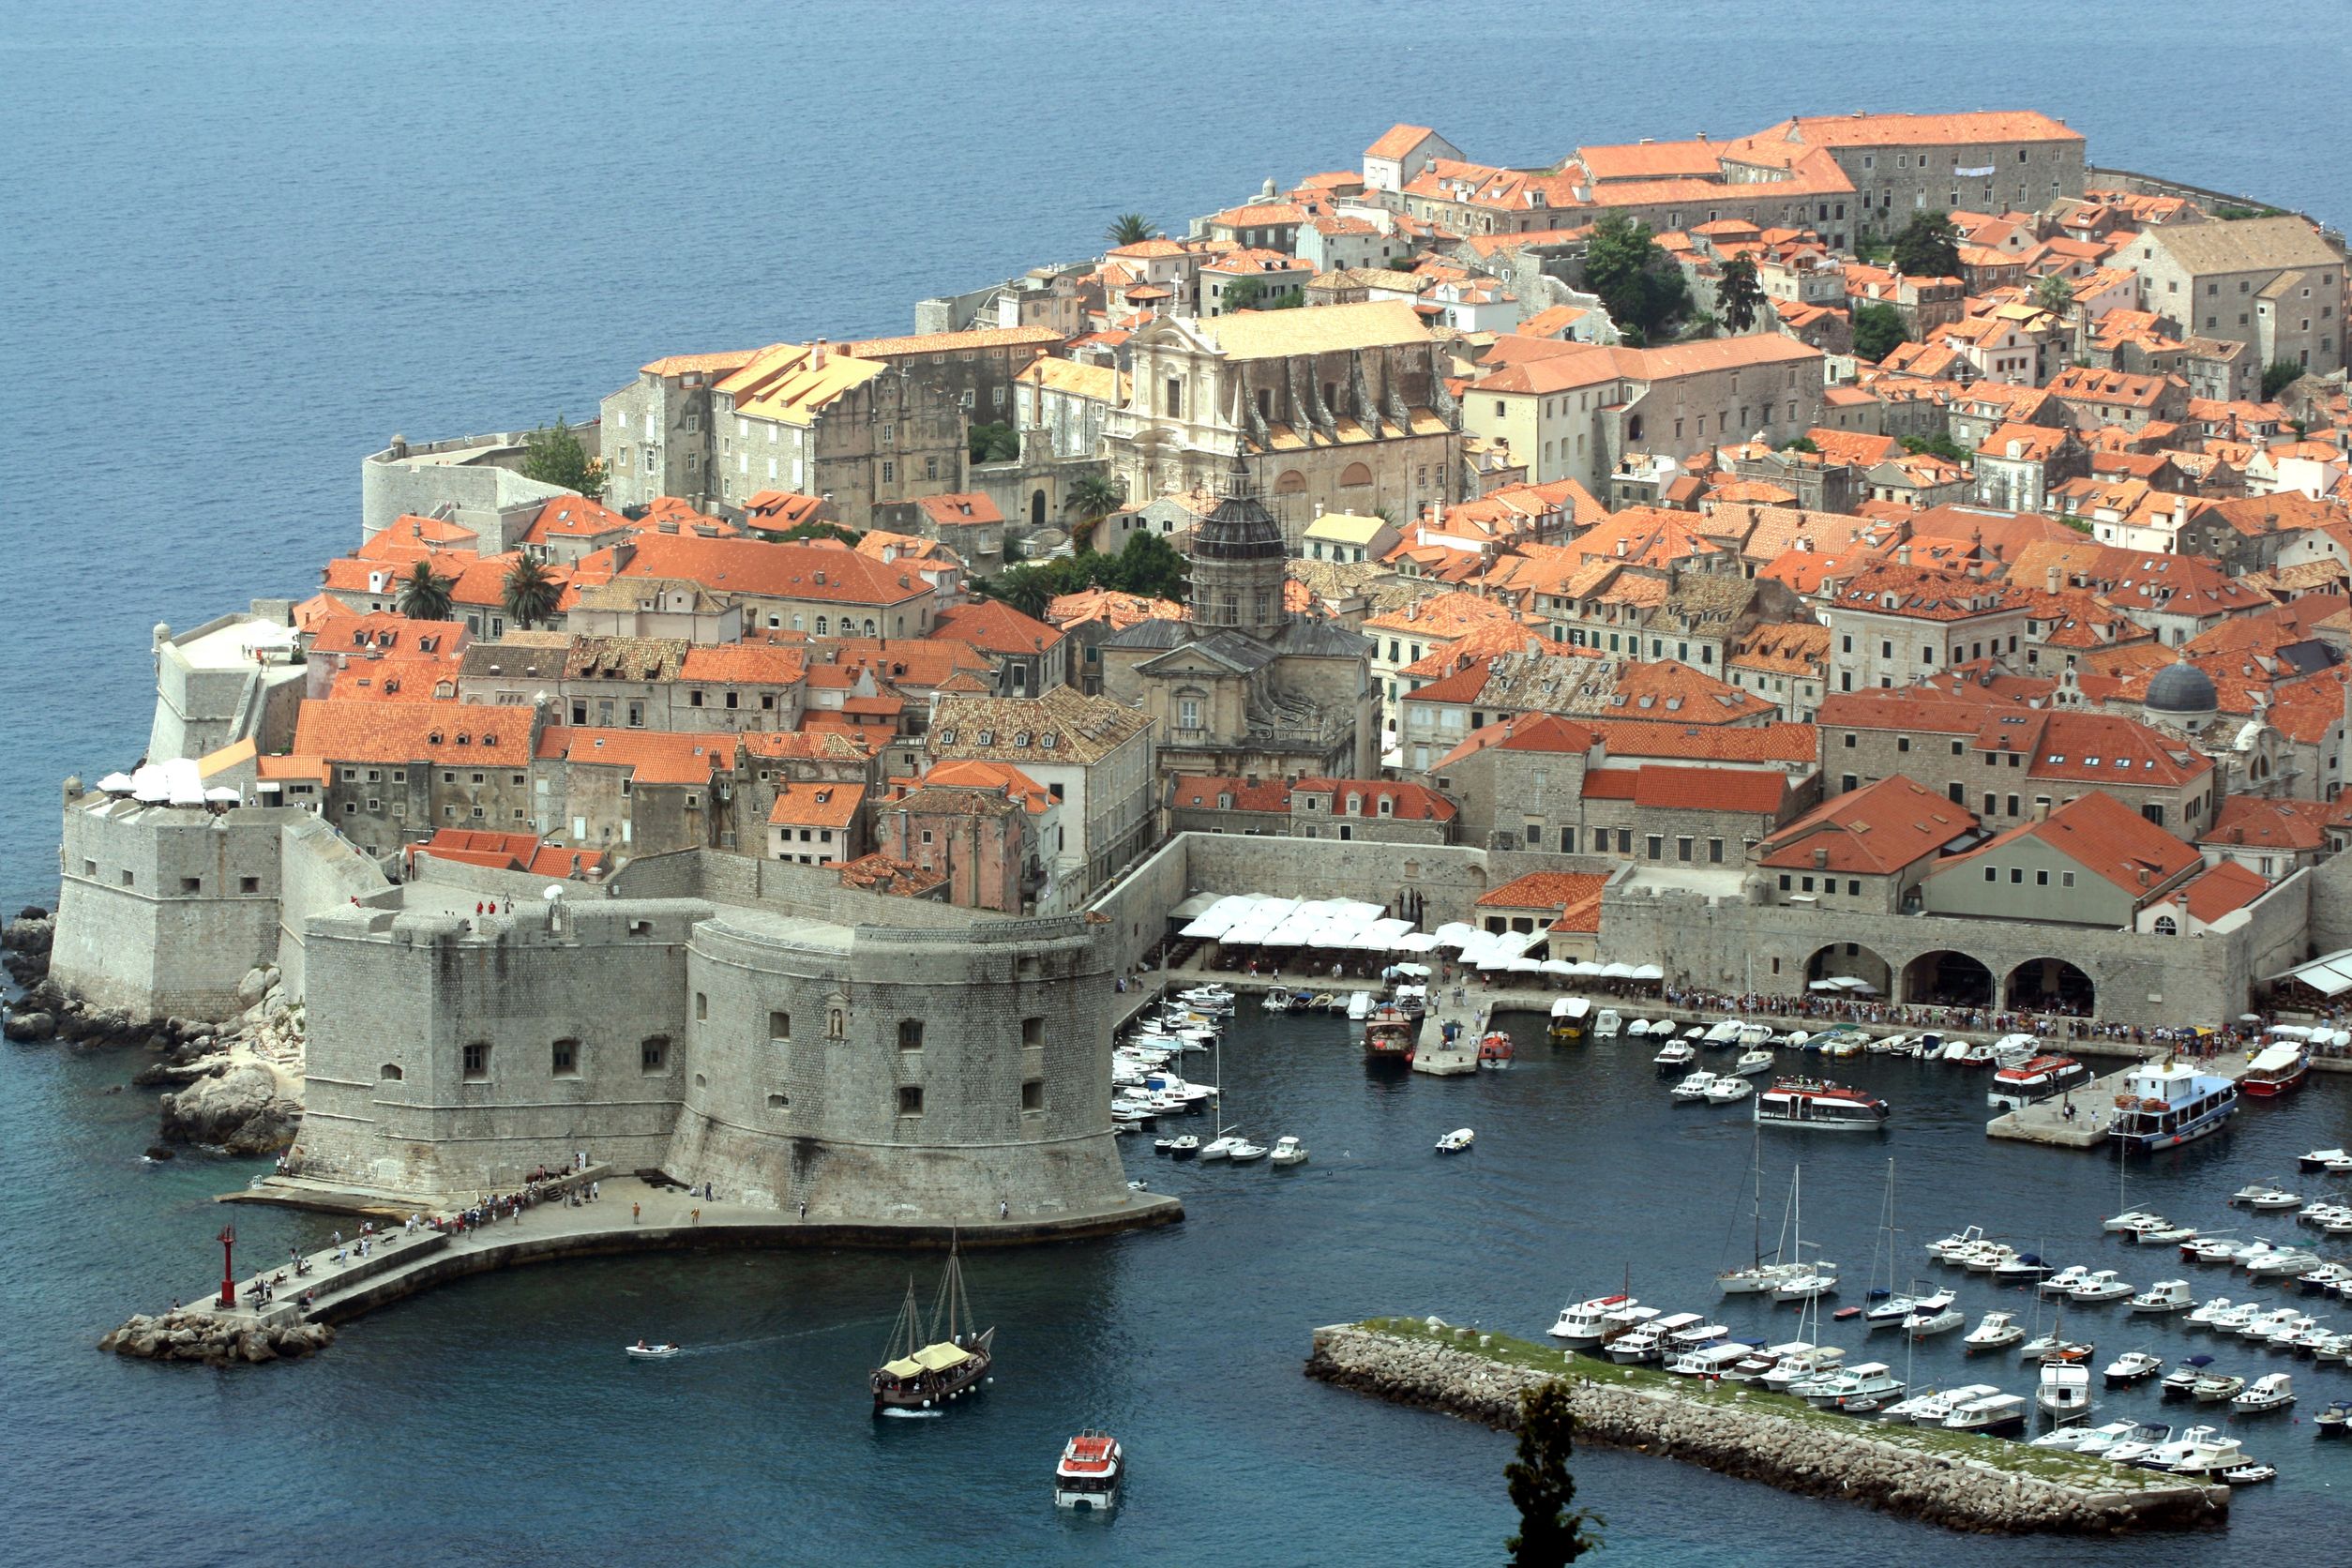 Free Activities to Try in Dubrovnik